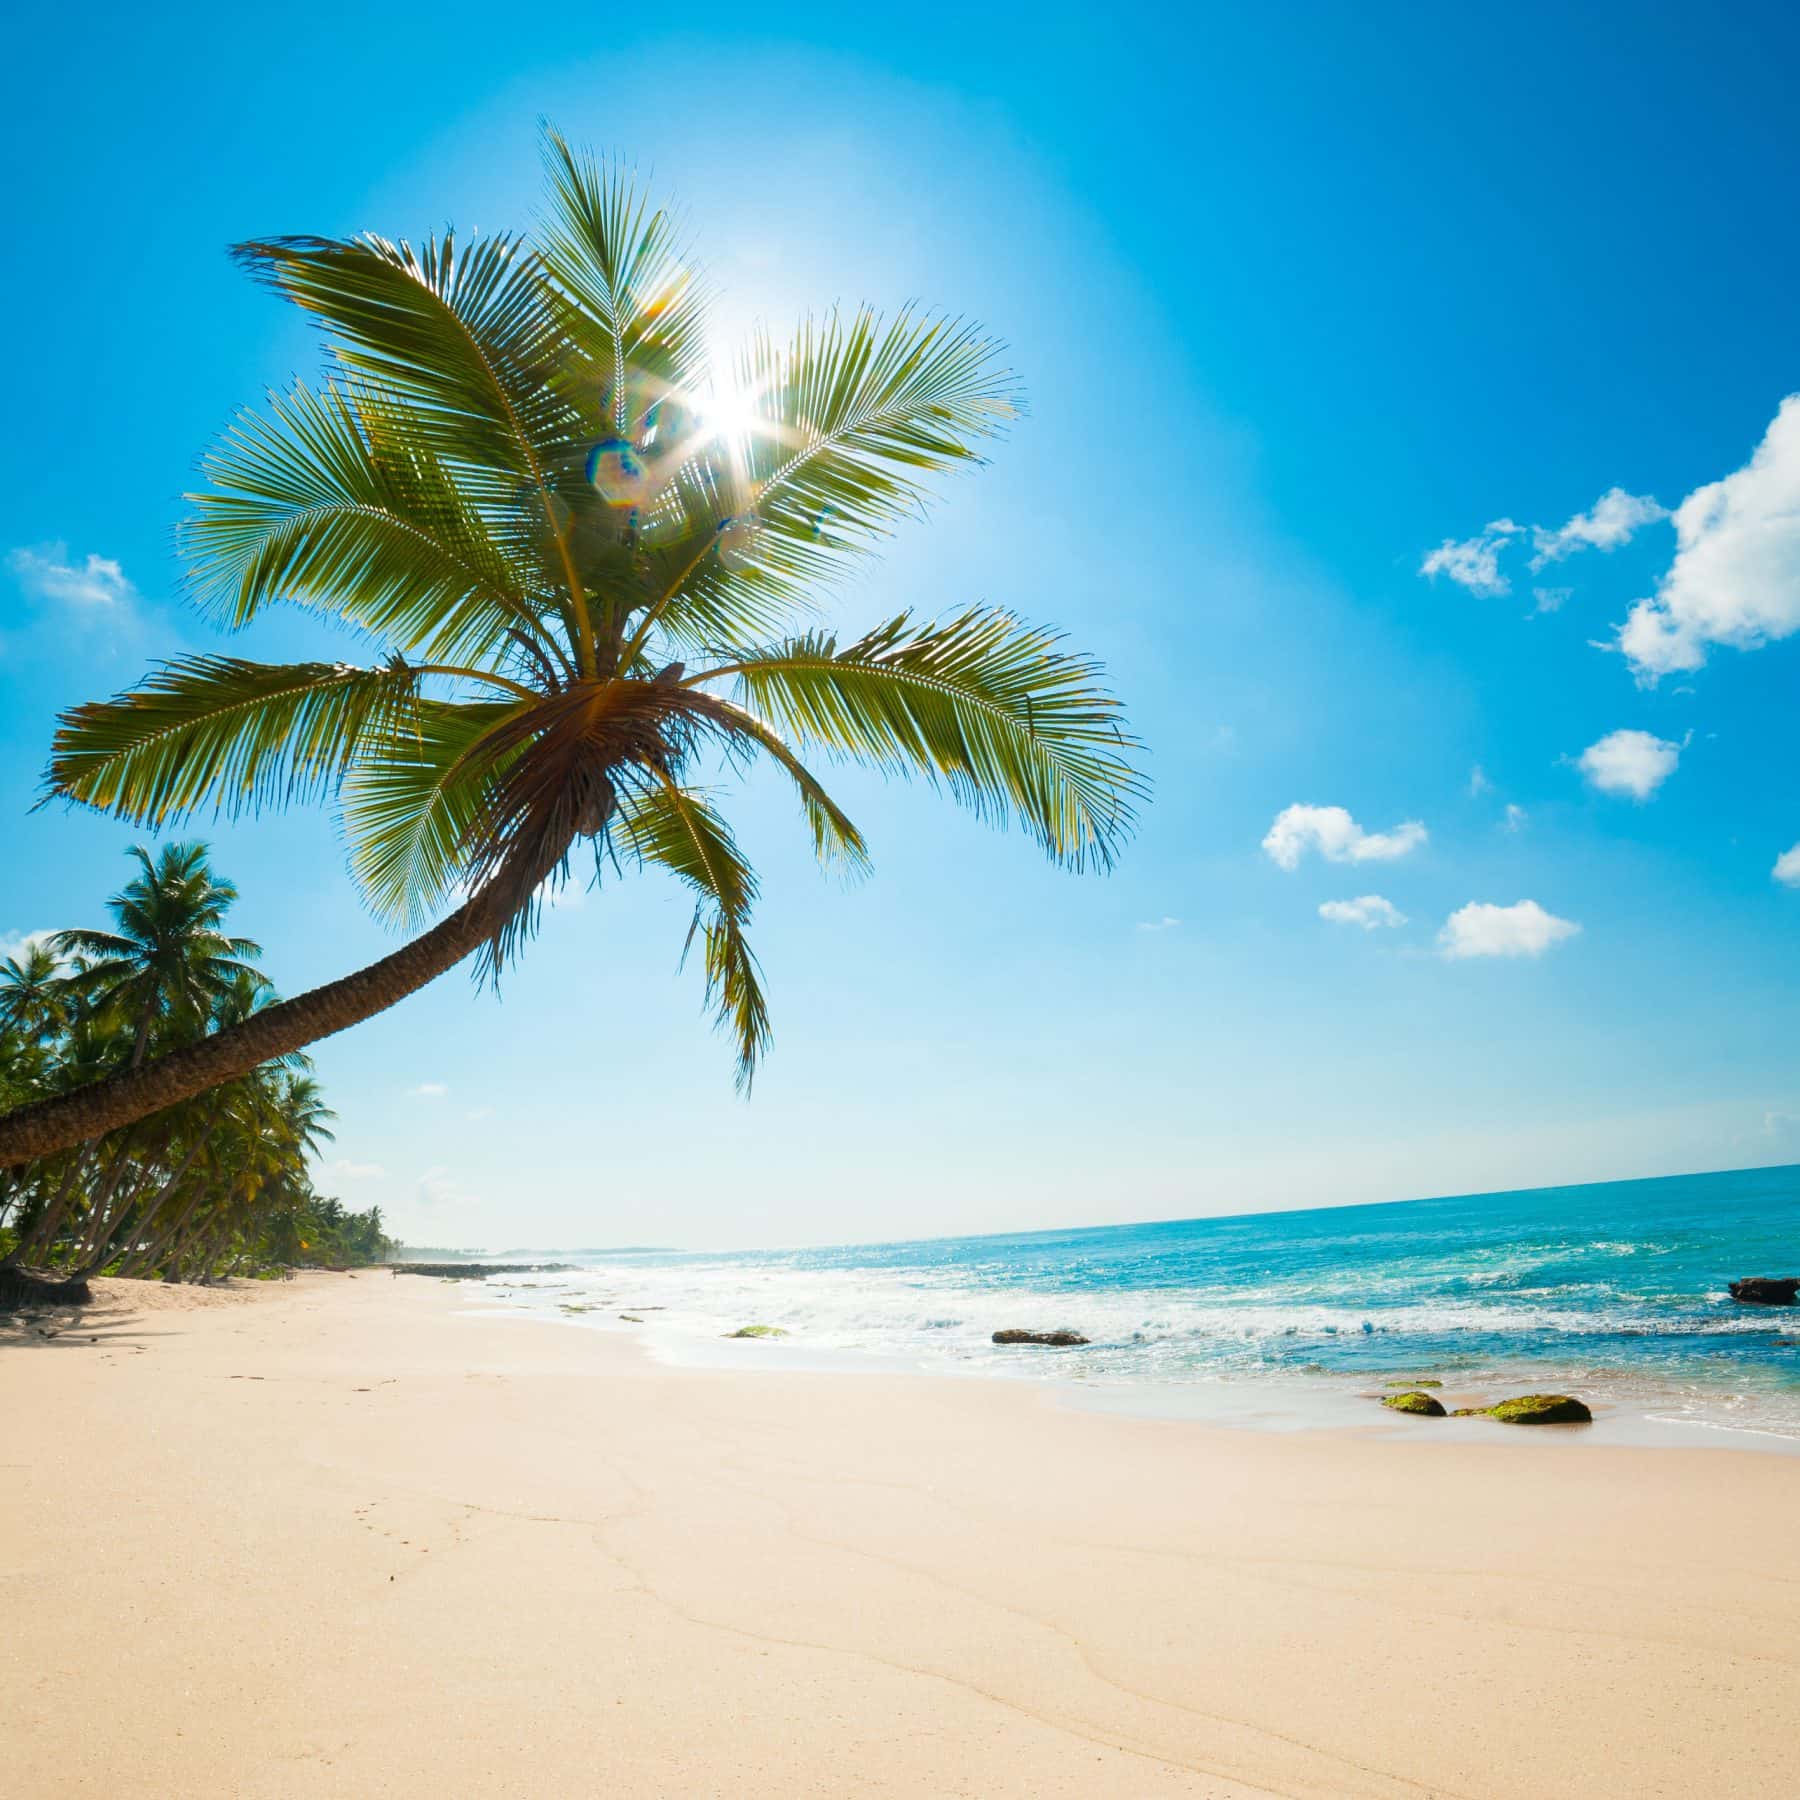 Luxury Holiday Deals, beach, palm tree and ocean view